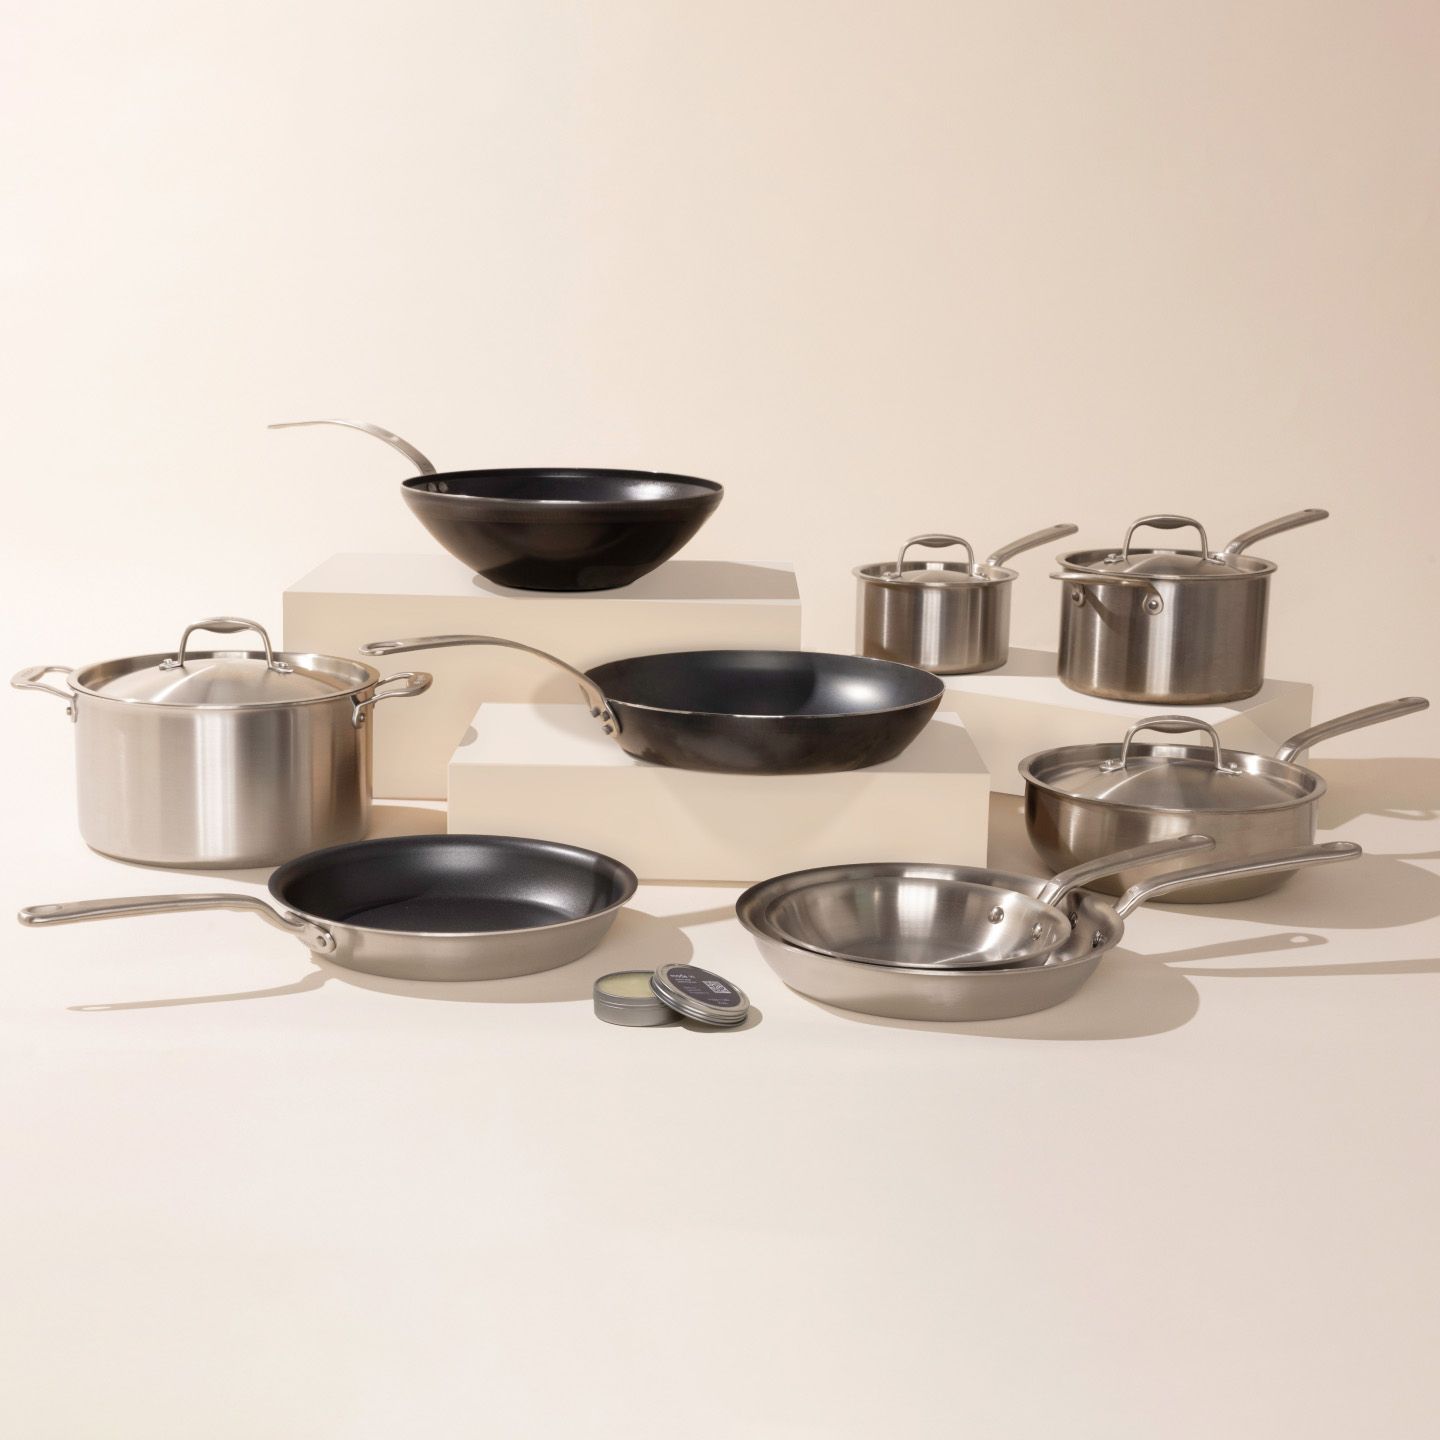 14-Piece Stainless Steel Assorted Cookware set with Glass Lids